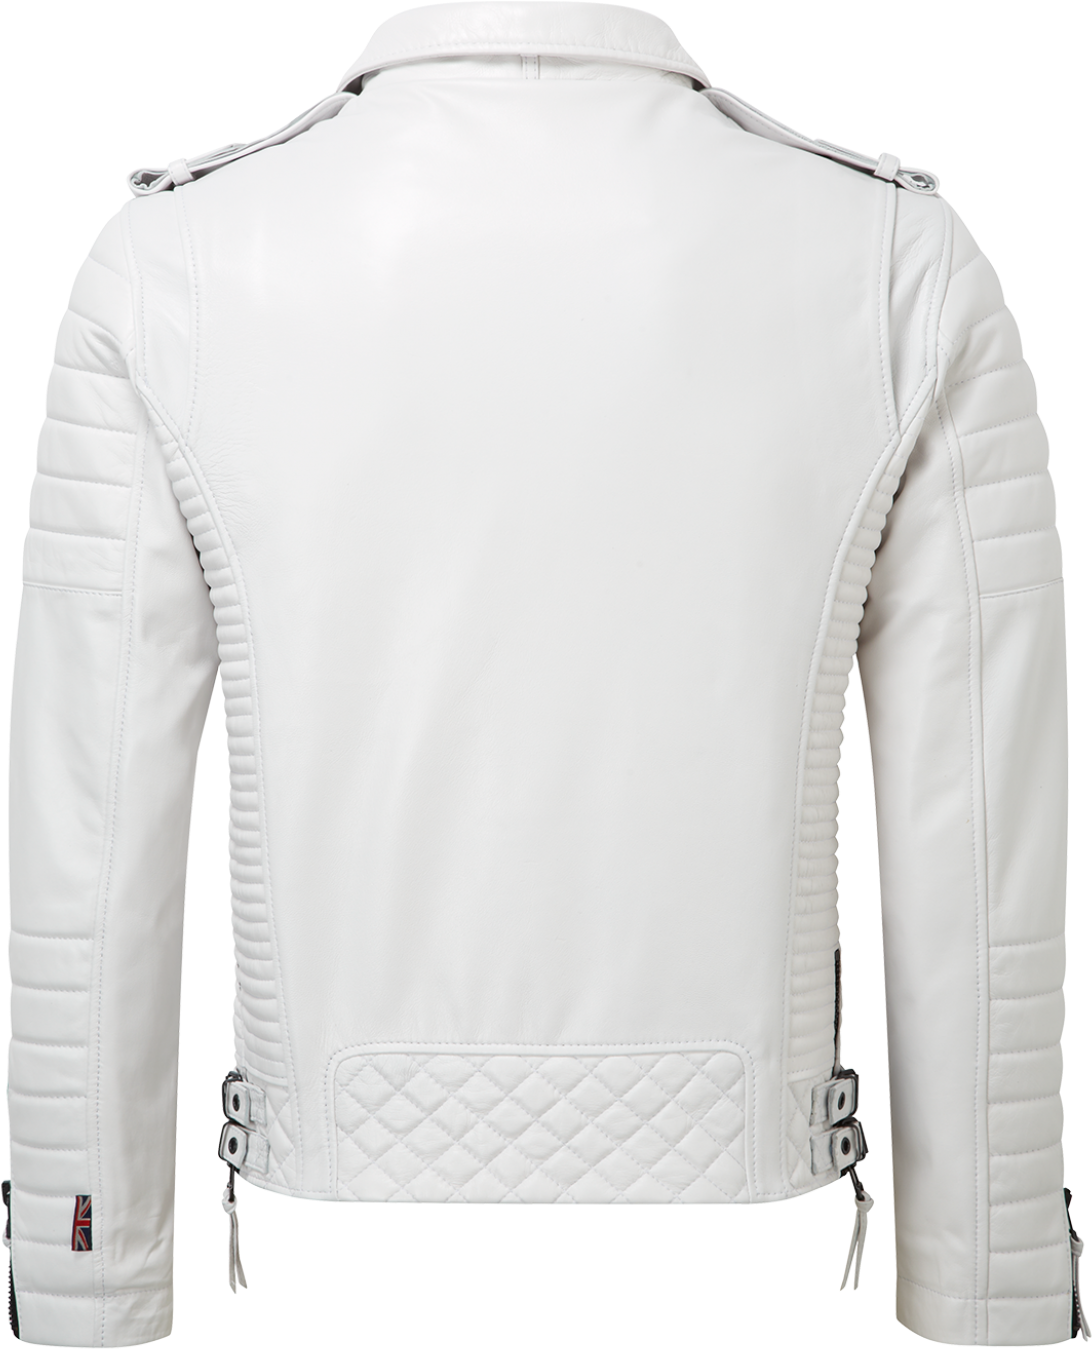 White Leather Motorcycle Jacket Rear View PNG